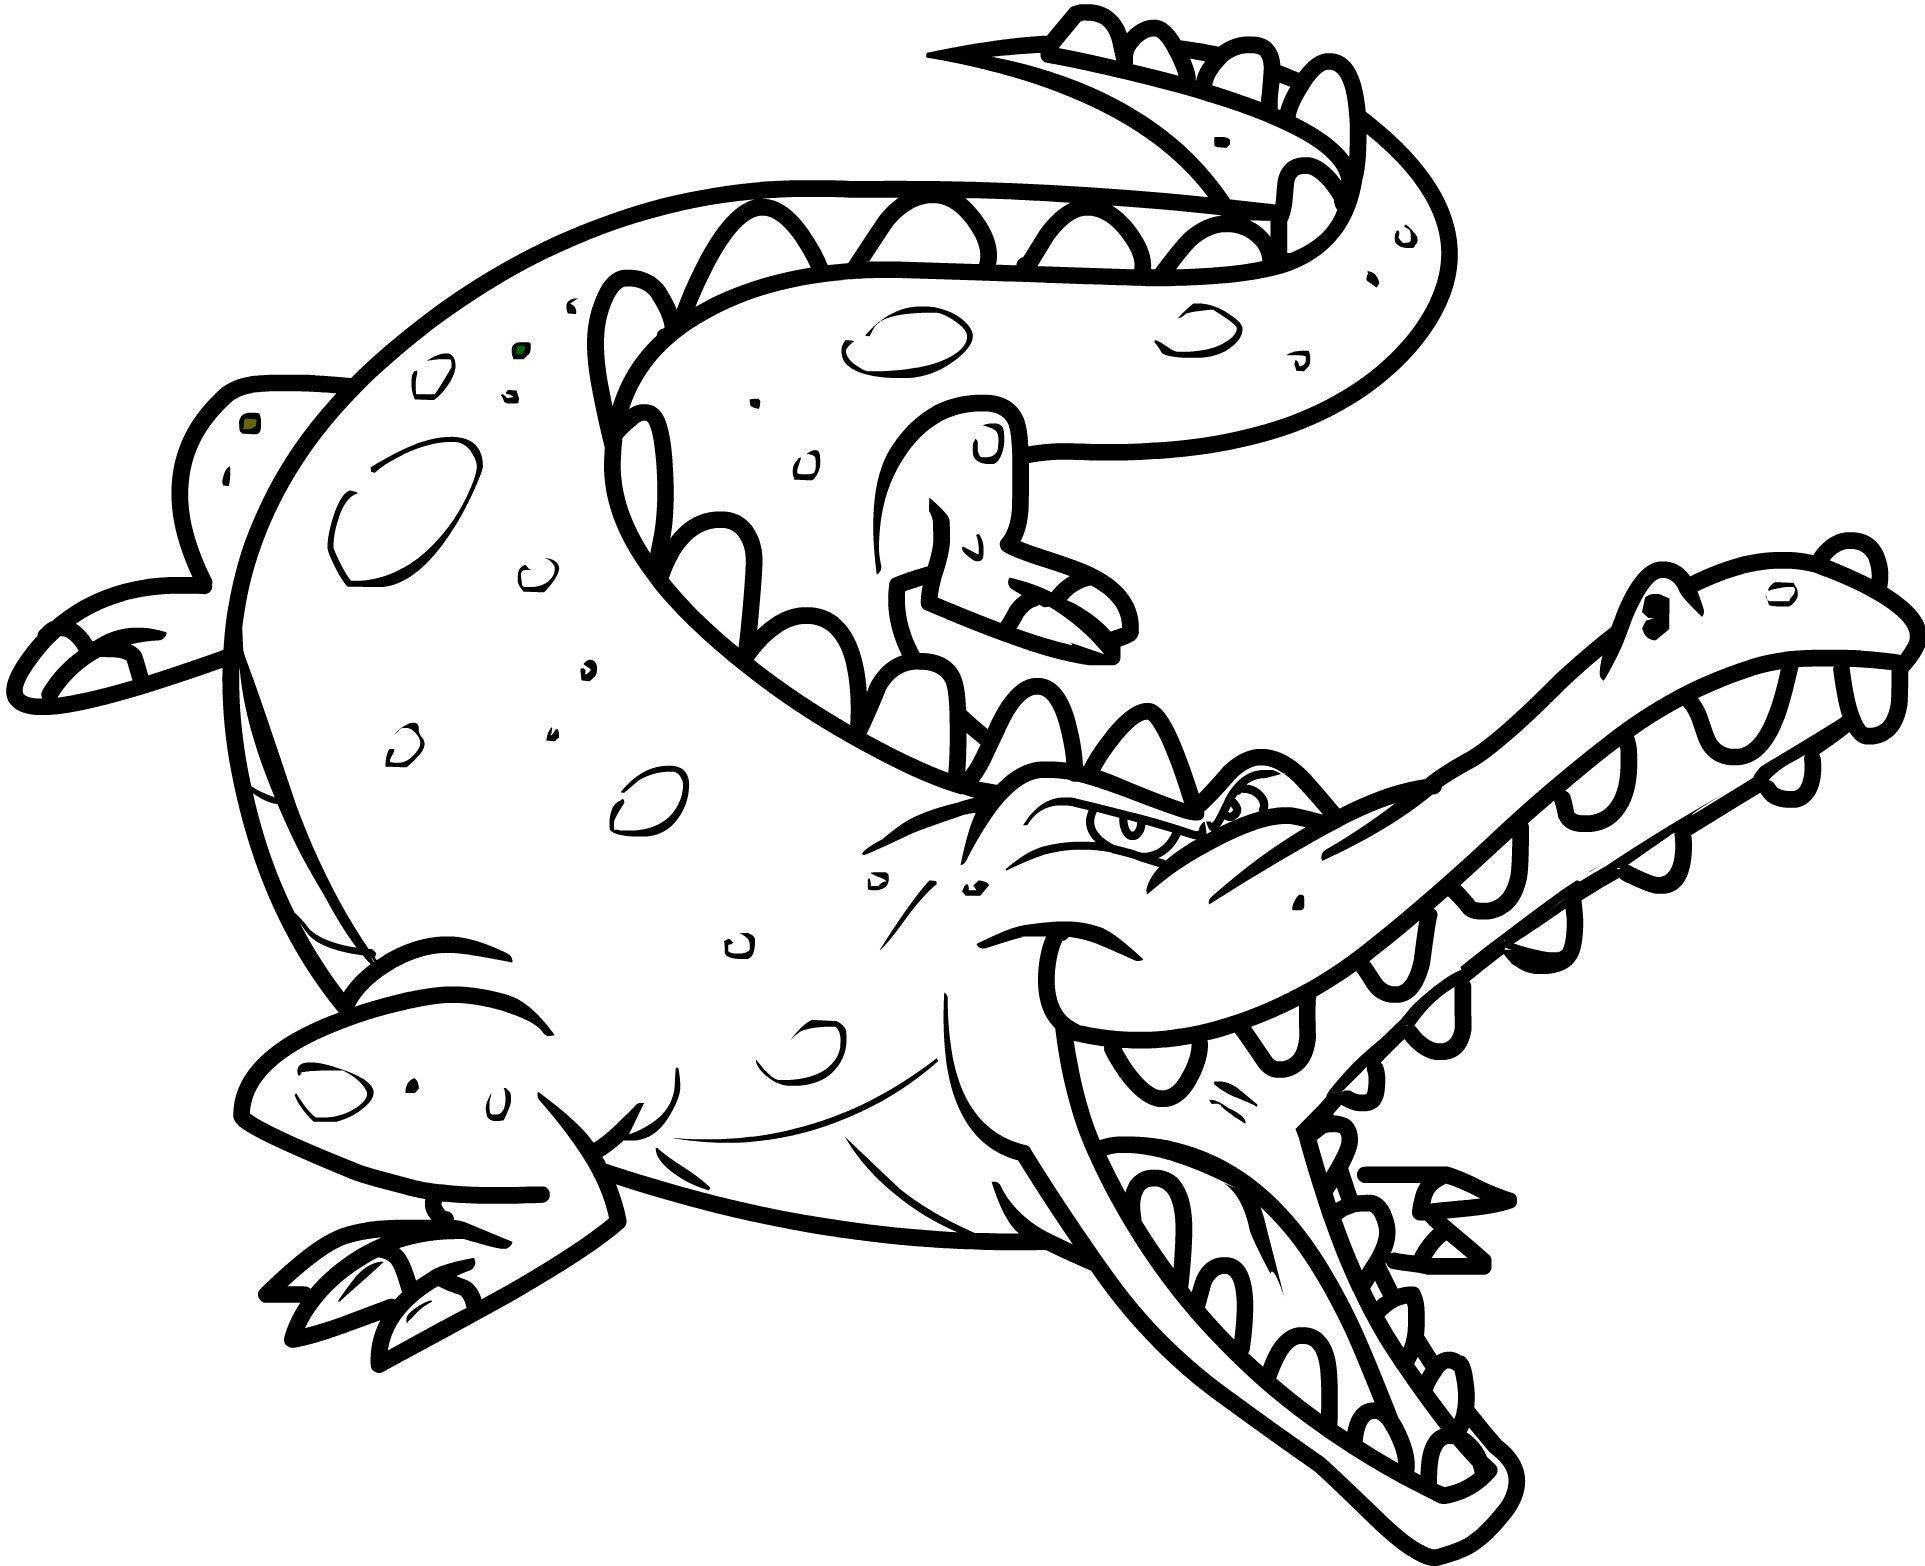 Free Coloring Pages Of Alligators
 Free Printable Crocodile Coloring Pages For Kids